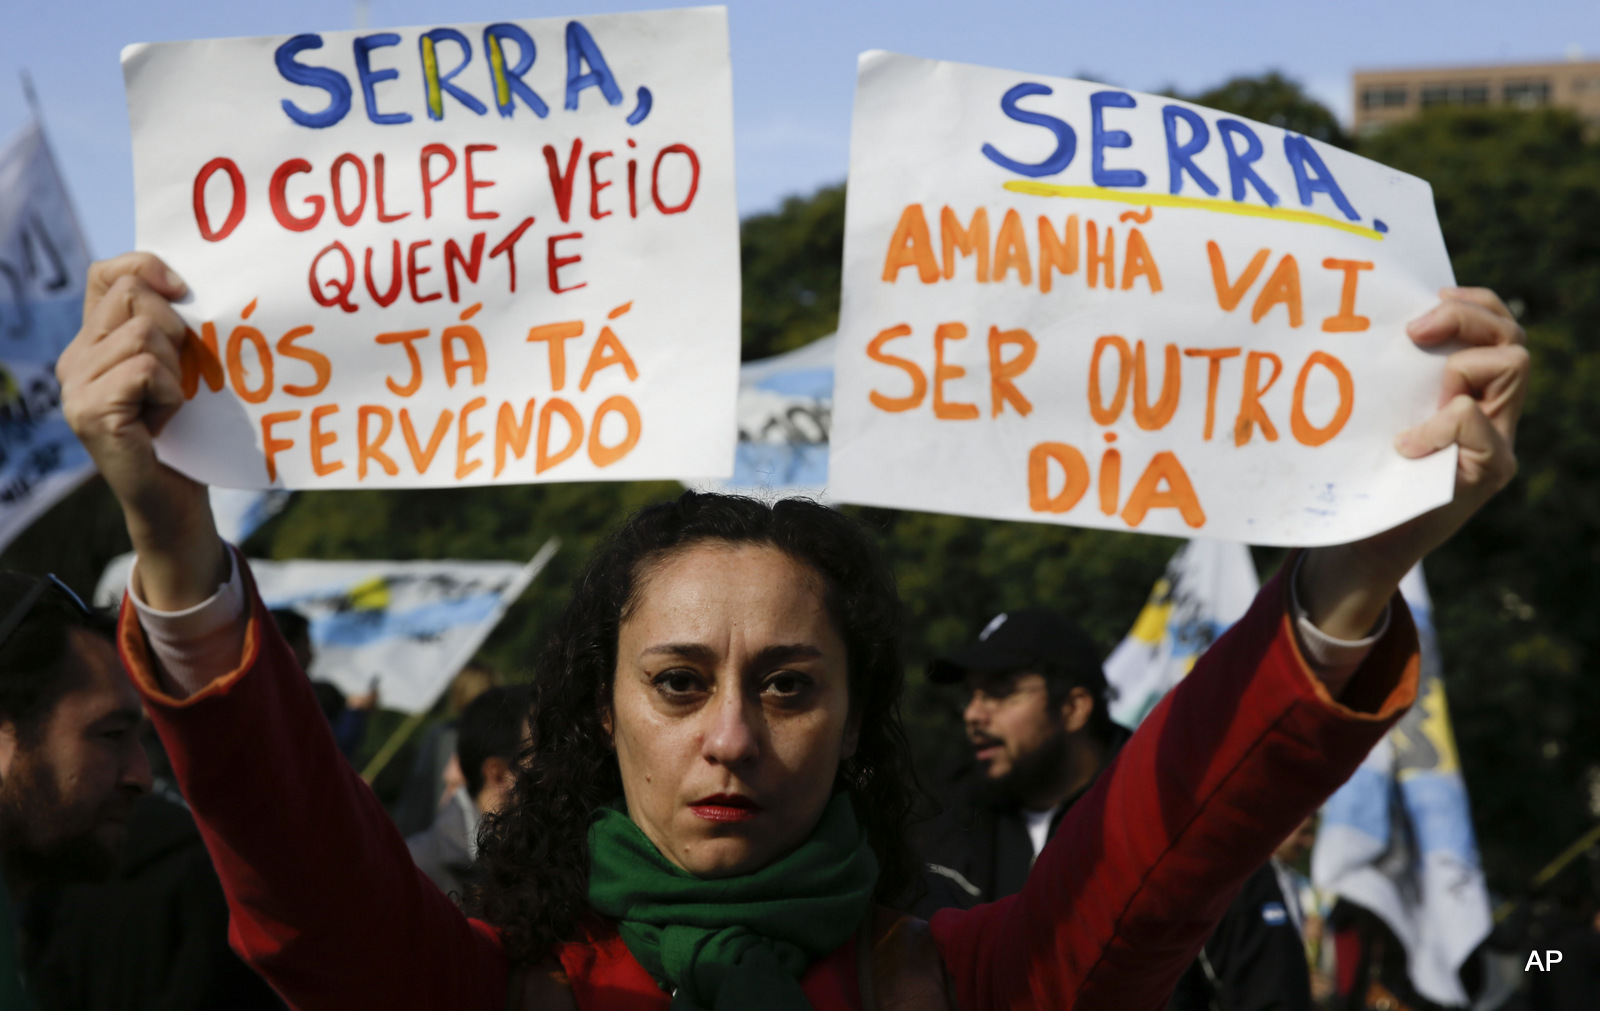 A woman holds up signs that say in Portuguese "Serra, the coup is hot, we're already boiling," left, and "Serra, tomorrow will be another day" as protesters wait for him outside the Foreign Relations Ministry where he'll meet Argentina's Foreign Minister Susana Malcorra in Buenos Aires, Argentina, Monday, May 23, 2016. Serra is on his first state visit since being appointed in the wake of Brazilian President Dilma Rousseff's impeachment. (AP Photo/Natacha Pisarenko)